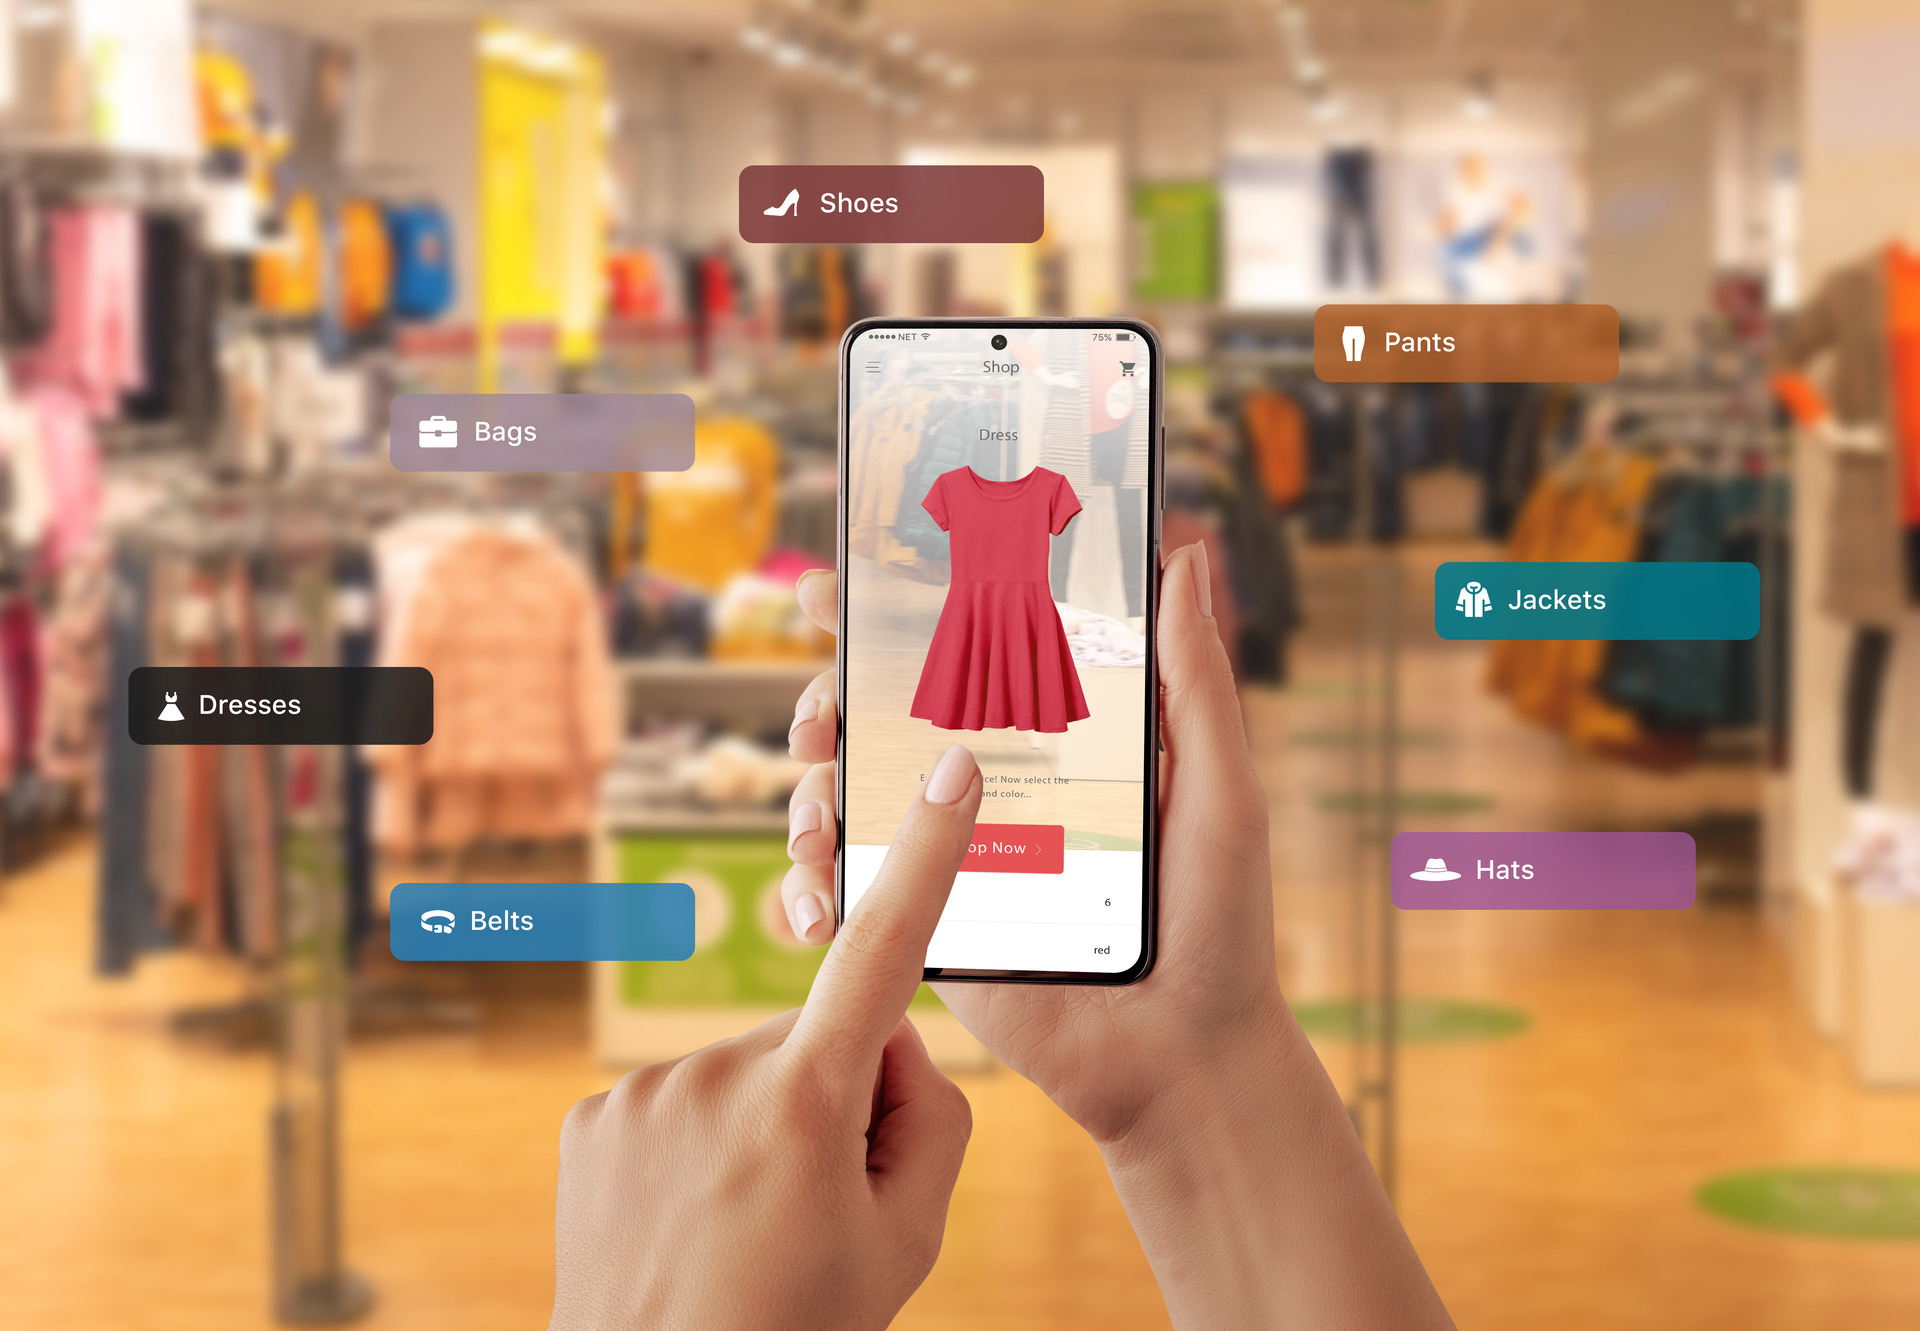 buying-clothes-with-virtual-reality-app-smart-phone-choosing-color-size-dress-1920x1331